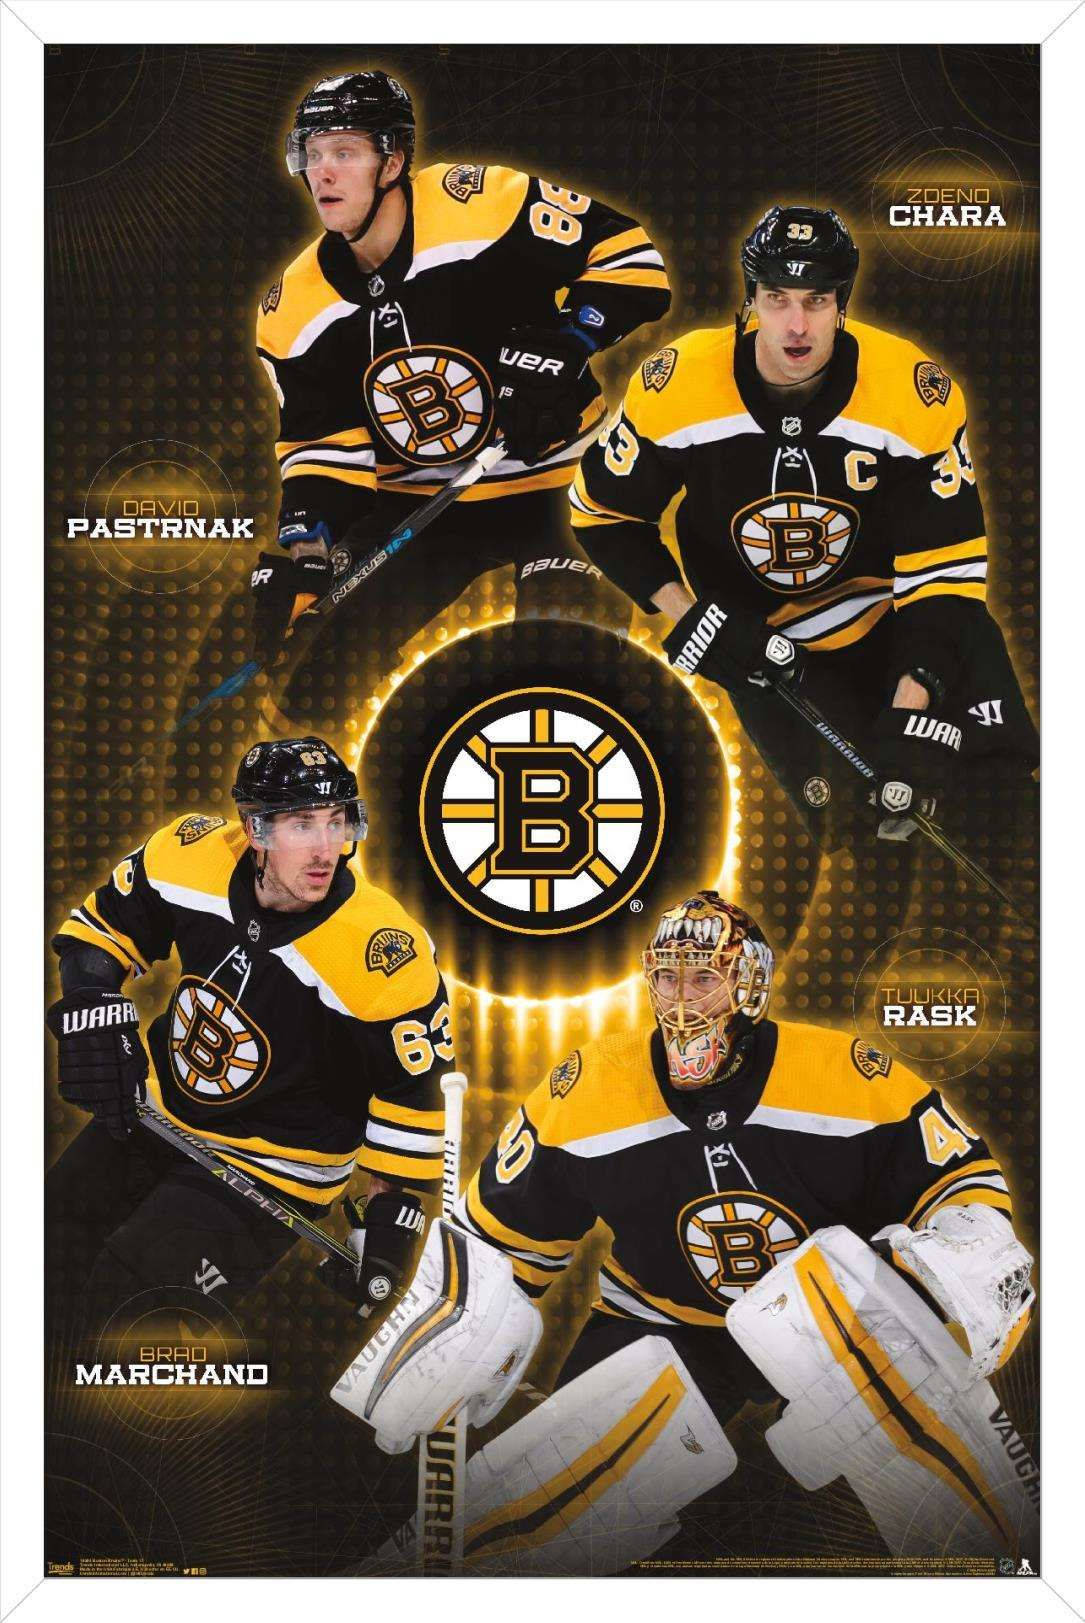 Exclusive Portrait Of Brad Marchand With His Boston Bruins Teammates. Wallpaper